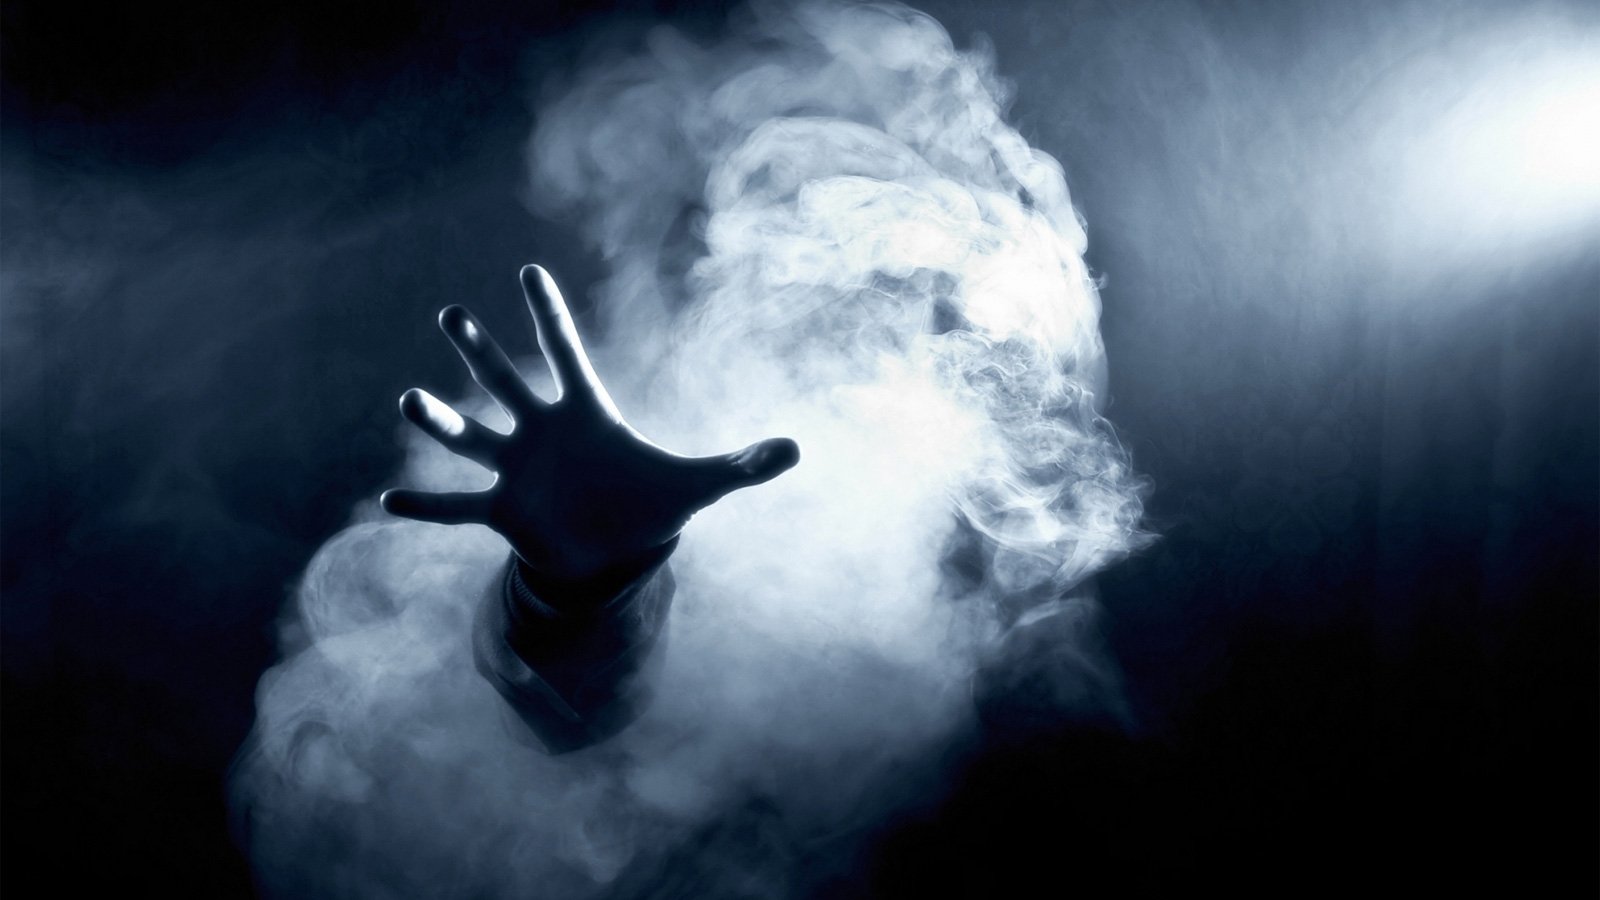 Hand reaching out from smoke